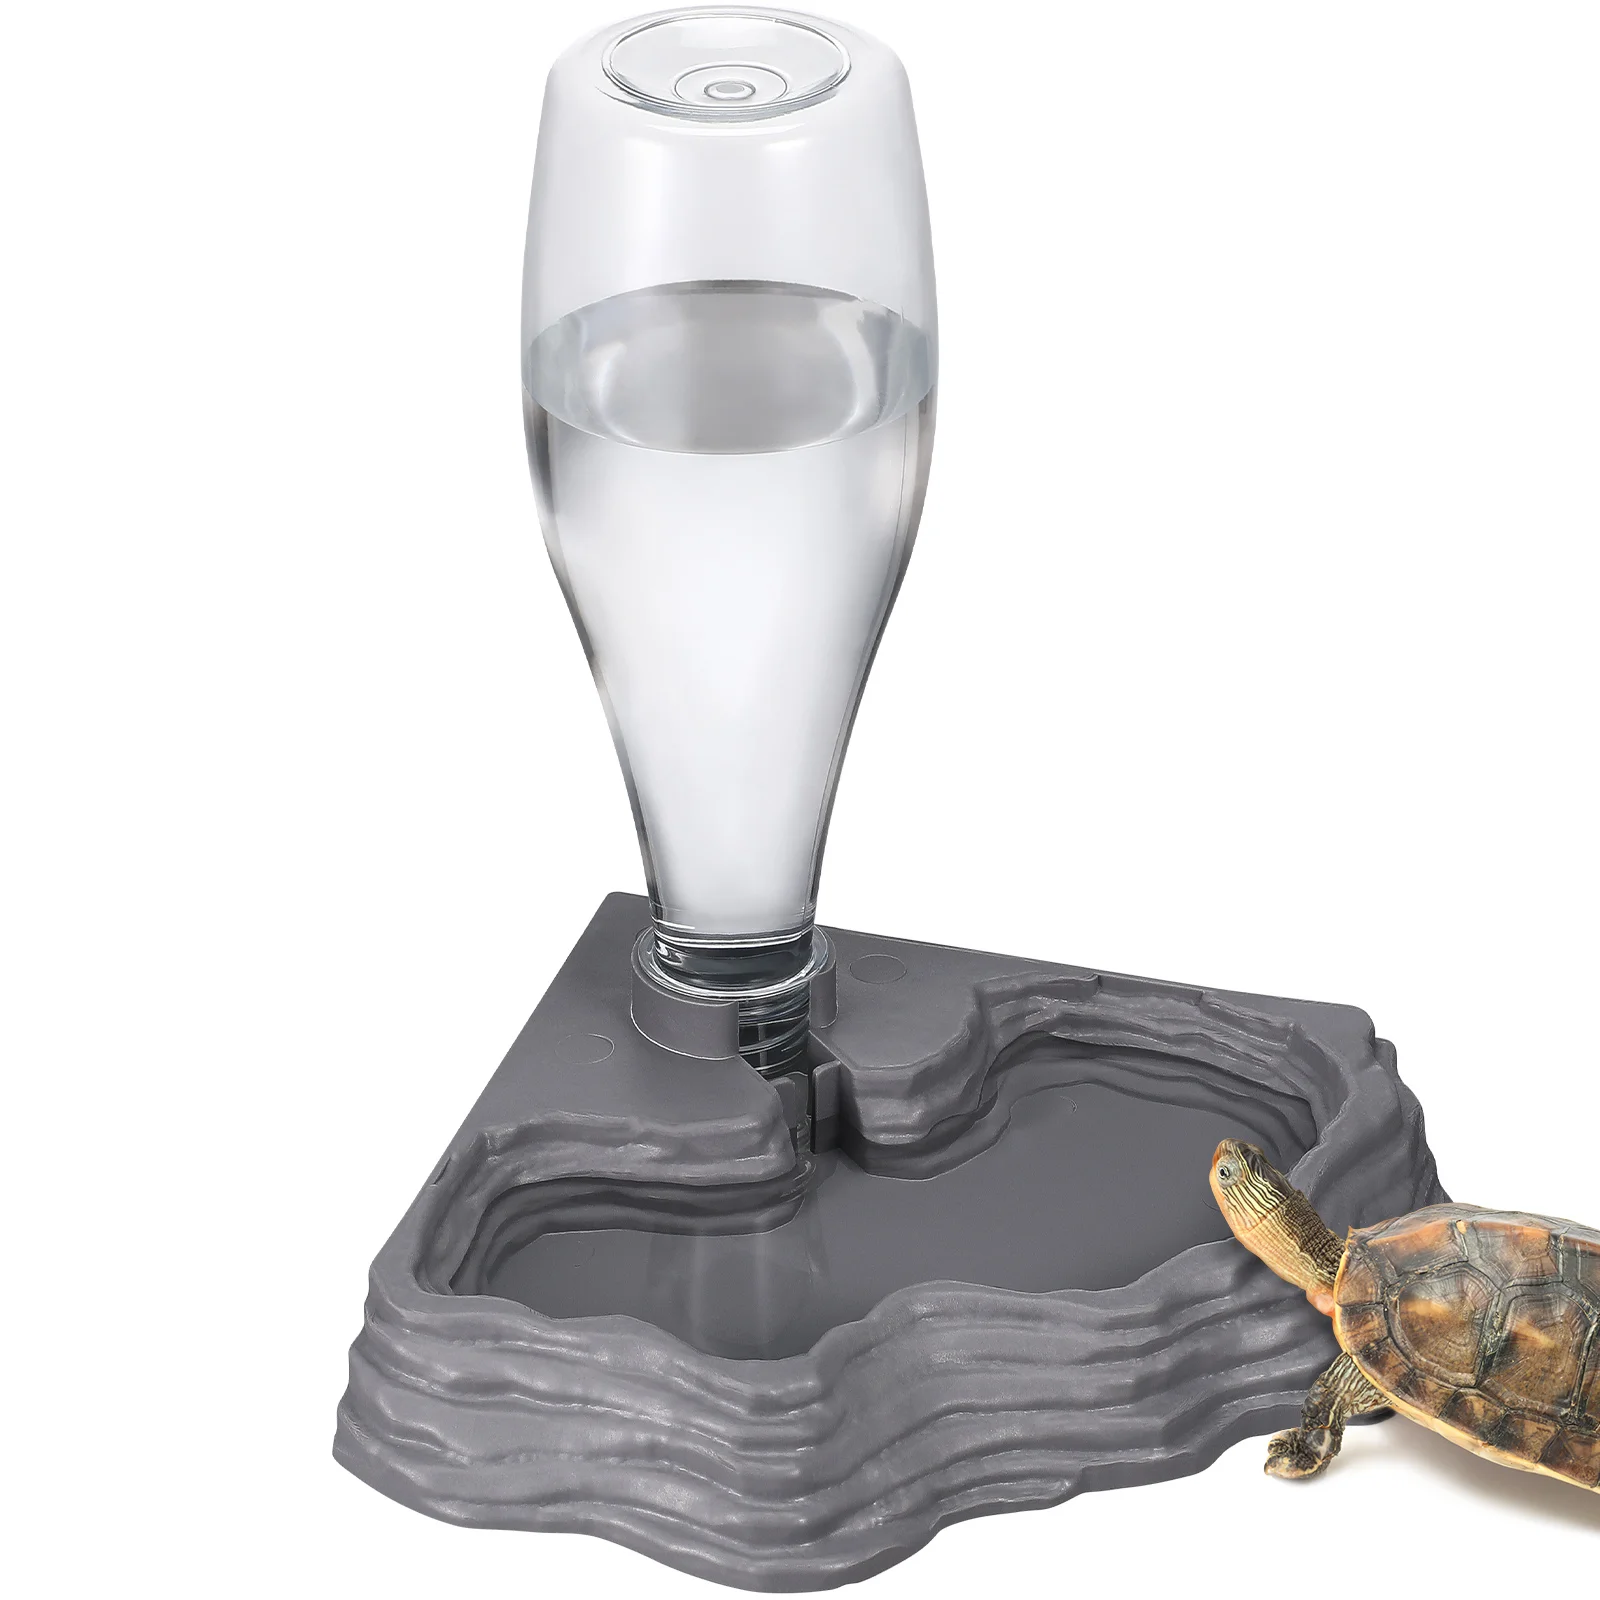 

Drinking Fountain Reptiles Pet Automatic Water Feeder Tortoise Dish Bowls Waterer Feeding Accessory Crawl Gecko Tank